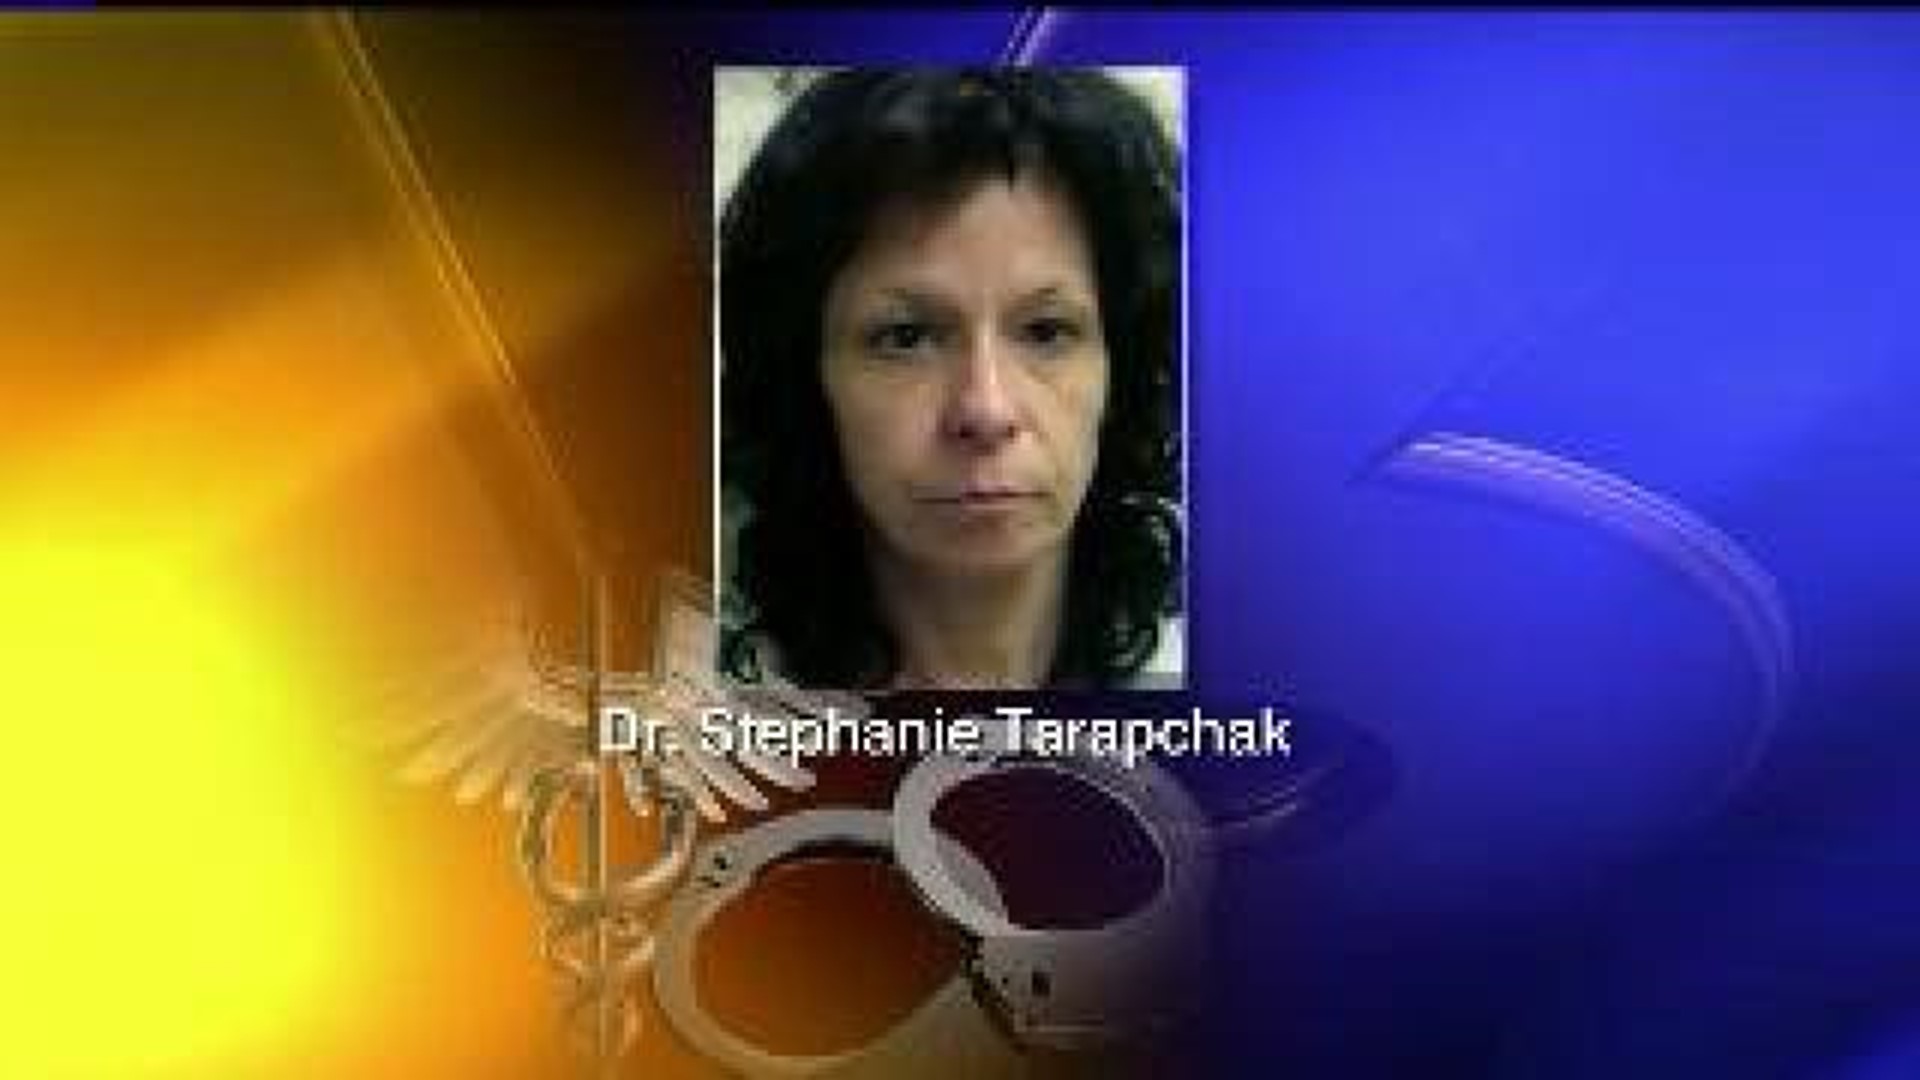 Arrested Ashland Doctor: A Life Spinning Out of Control?